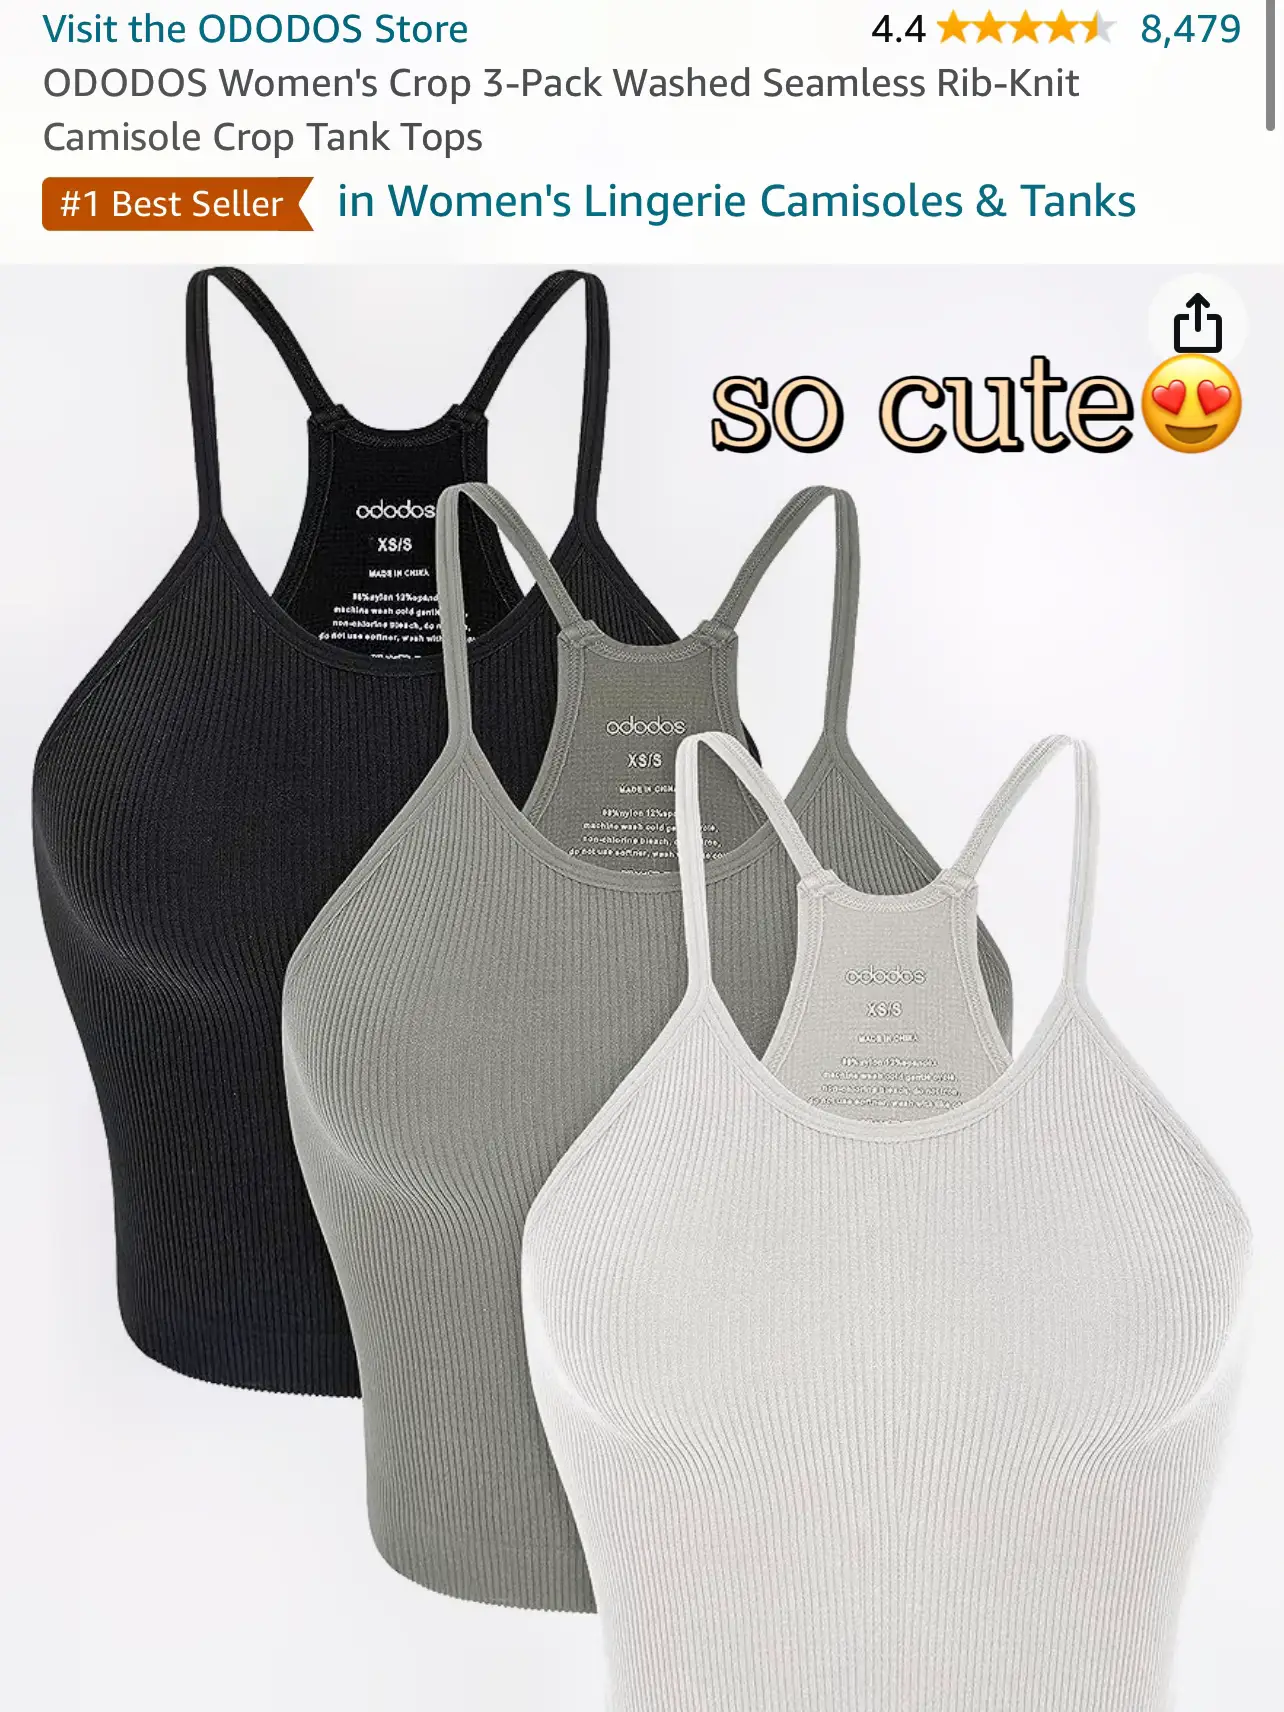 Buy ODODOS Women's Crop 3-Pack Waffle Knit Seamless Camisole Crop